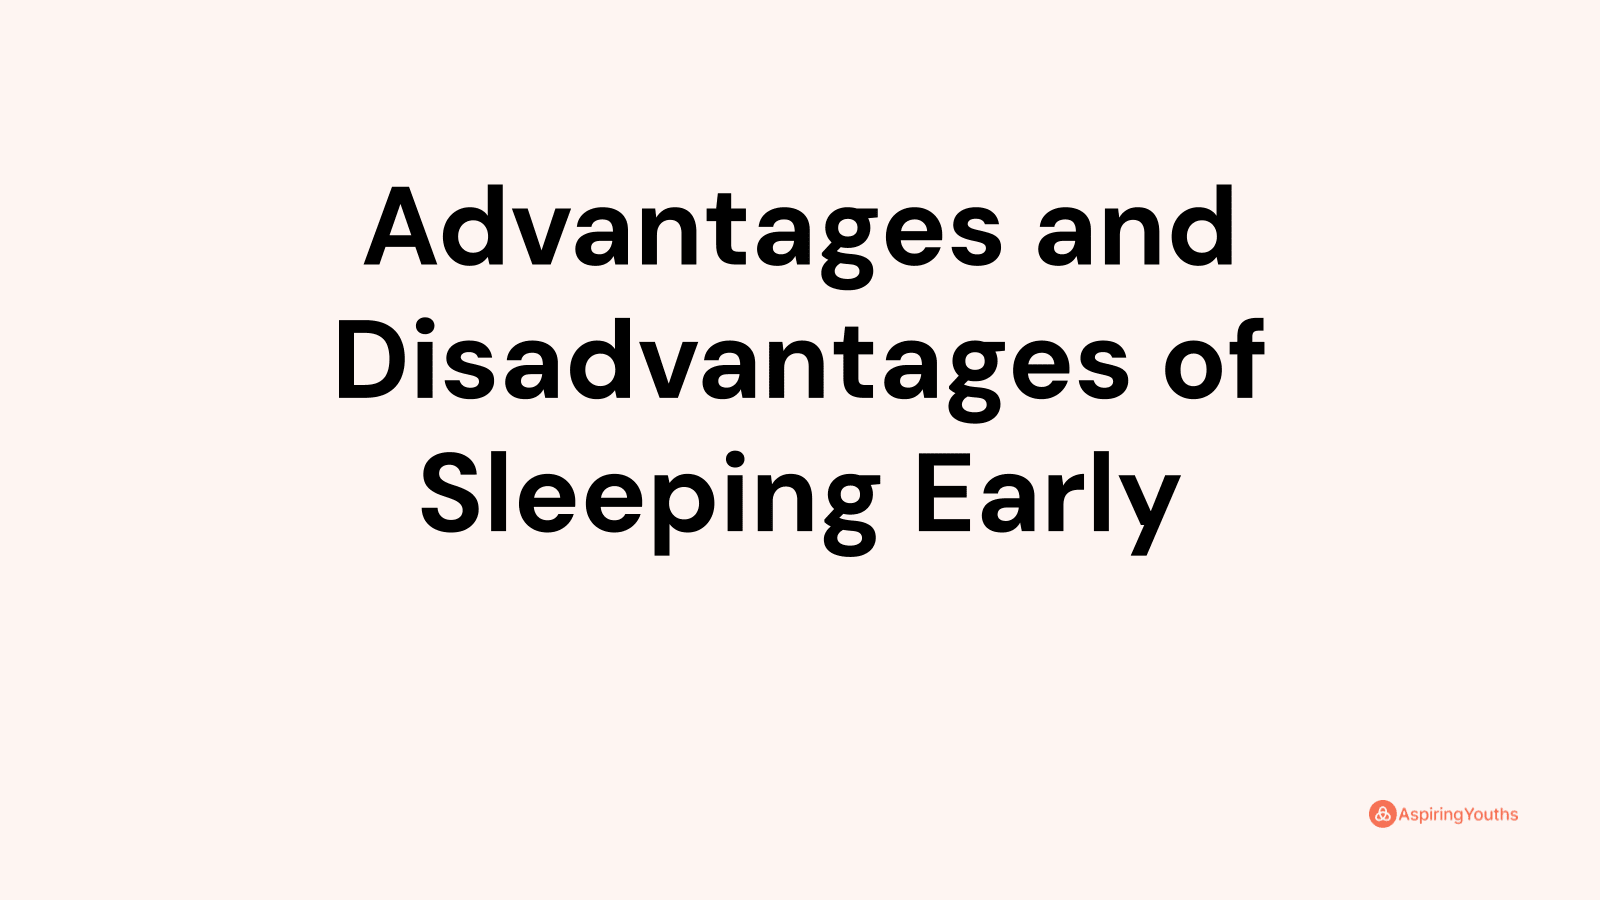 Advantages and disadvantages of Sleeping Early